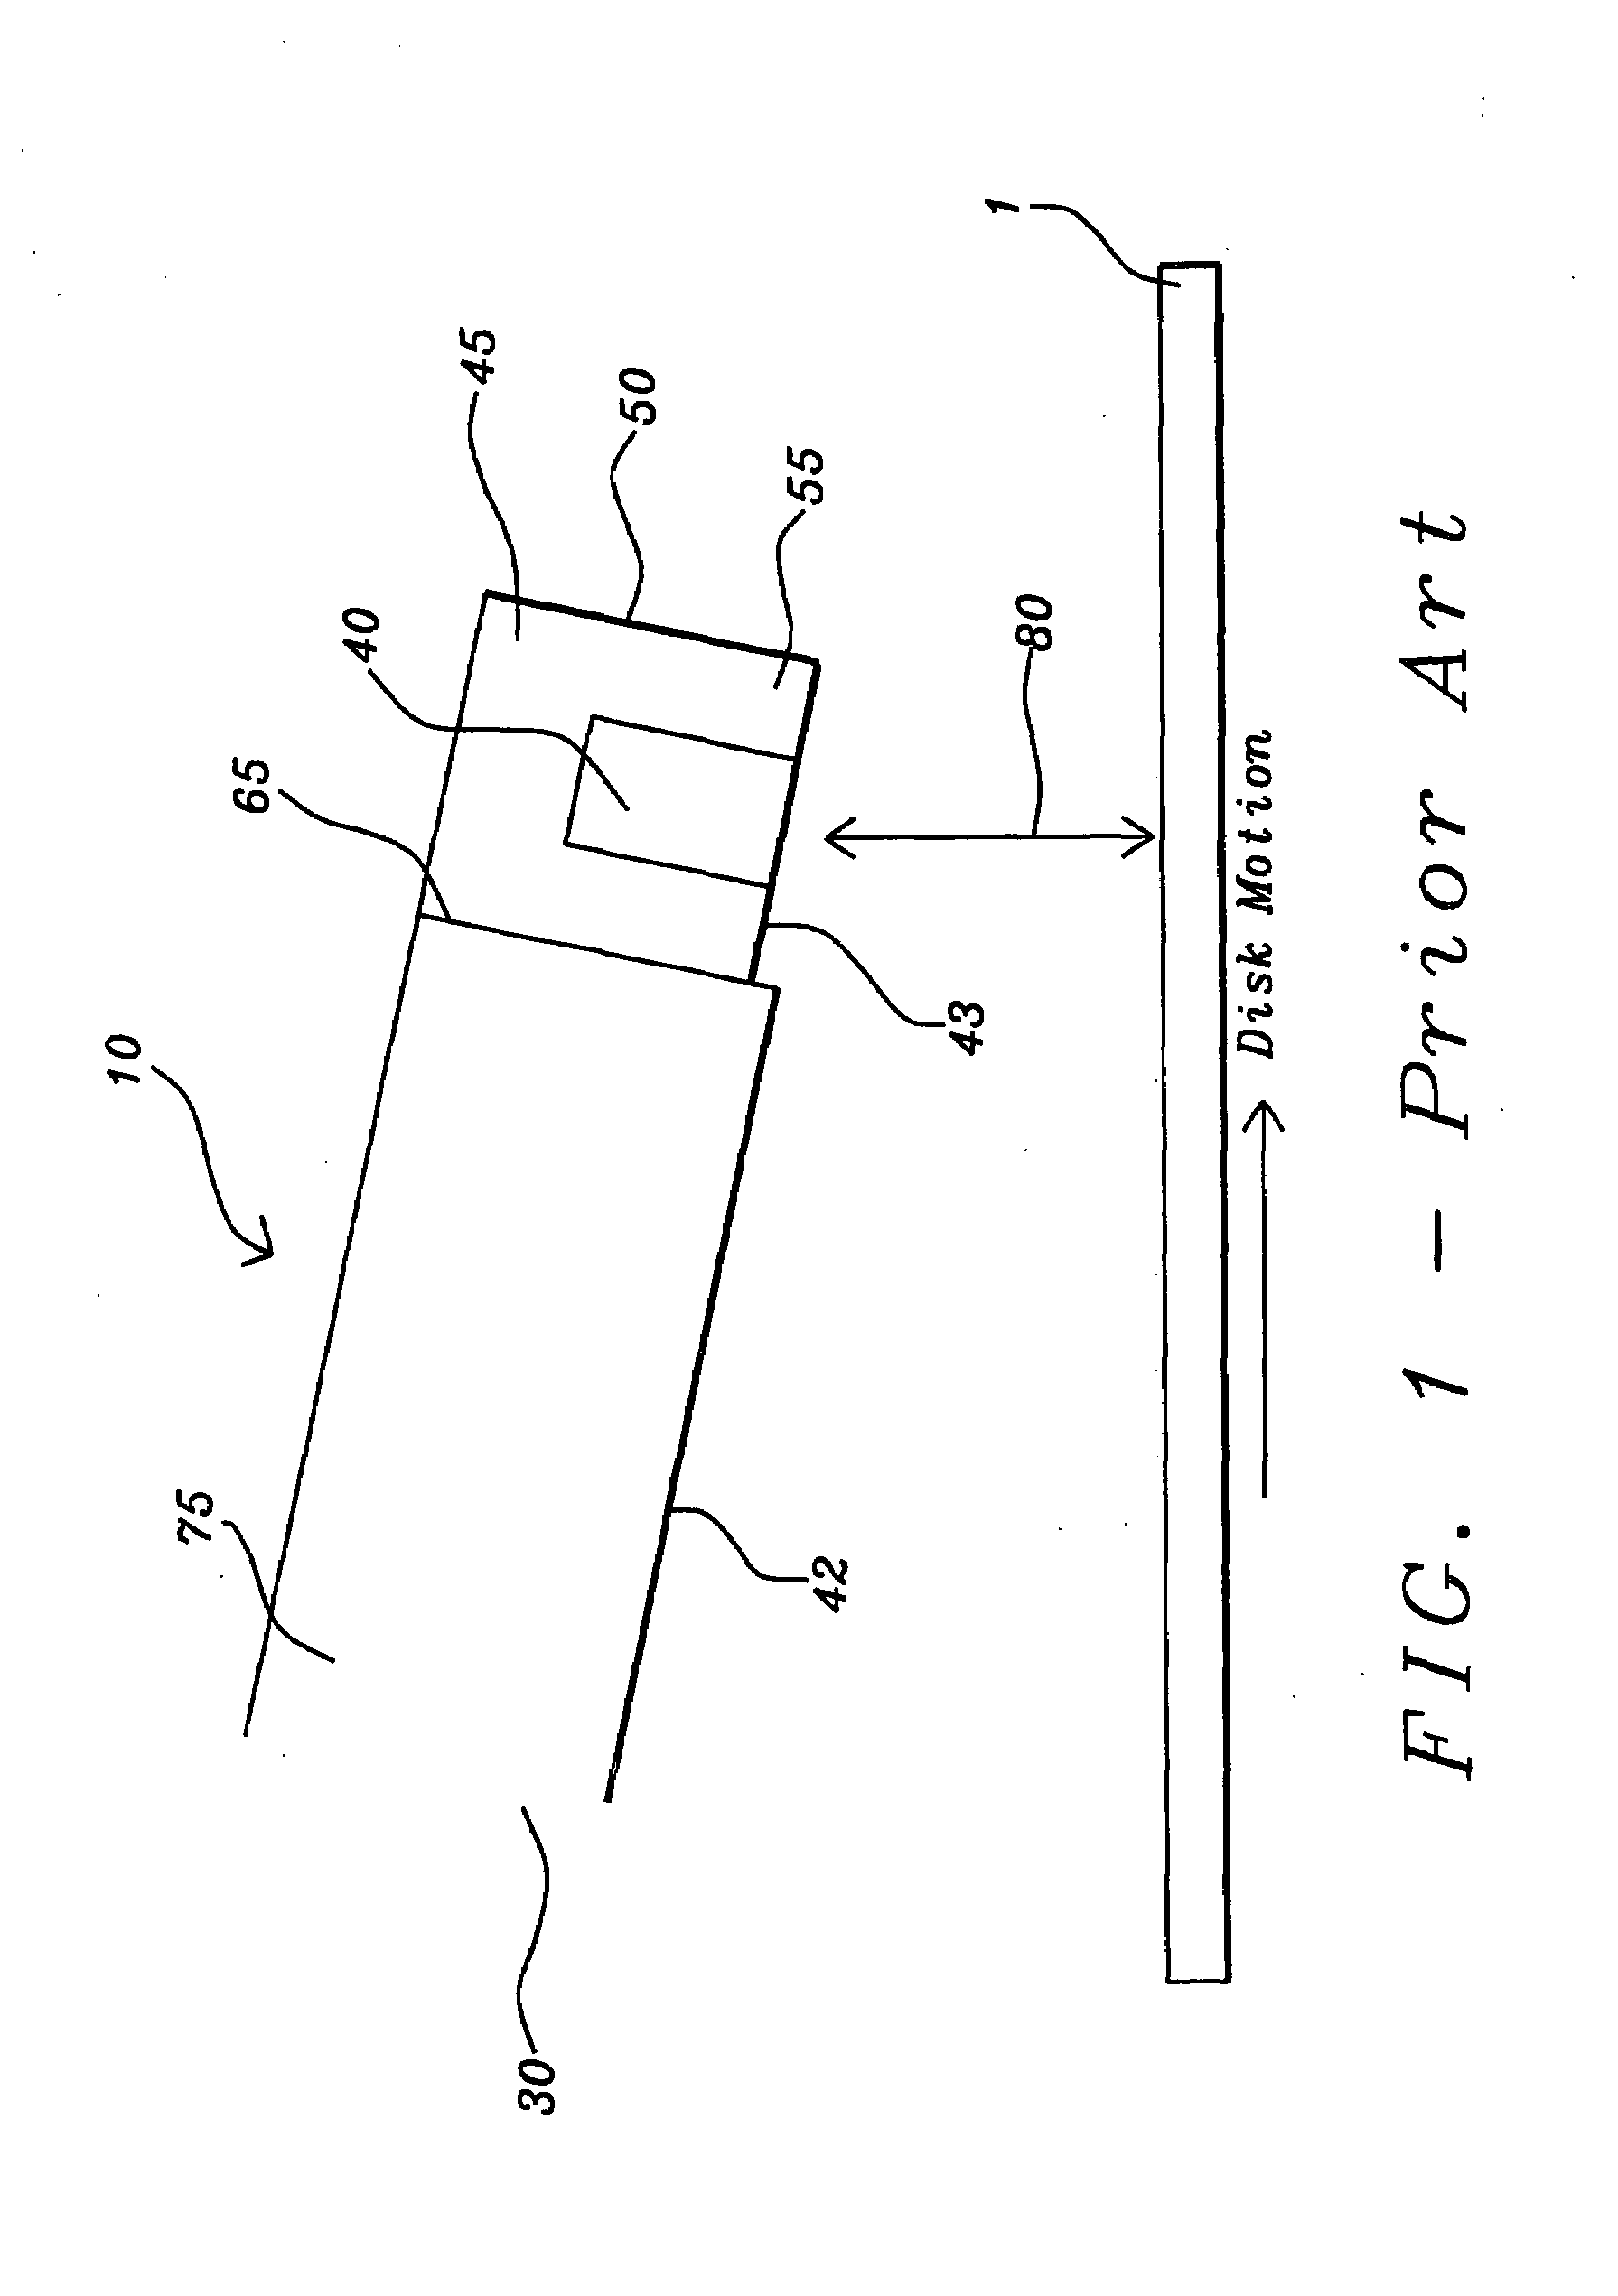 Method to protect the magnetic recording head from thermal asperities during disk drive operation